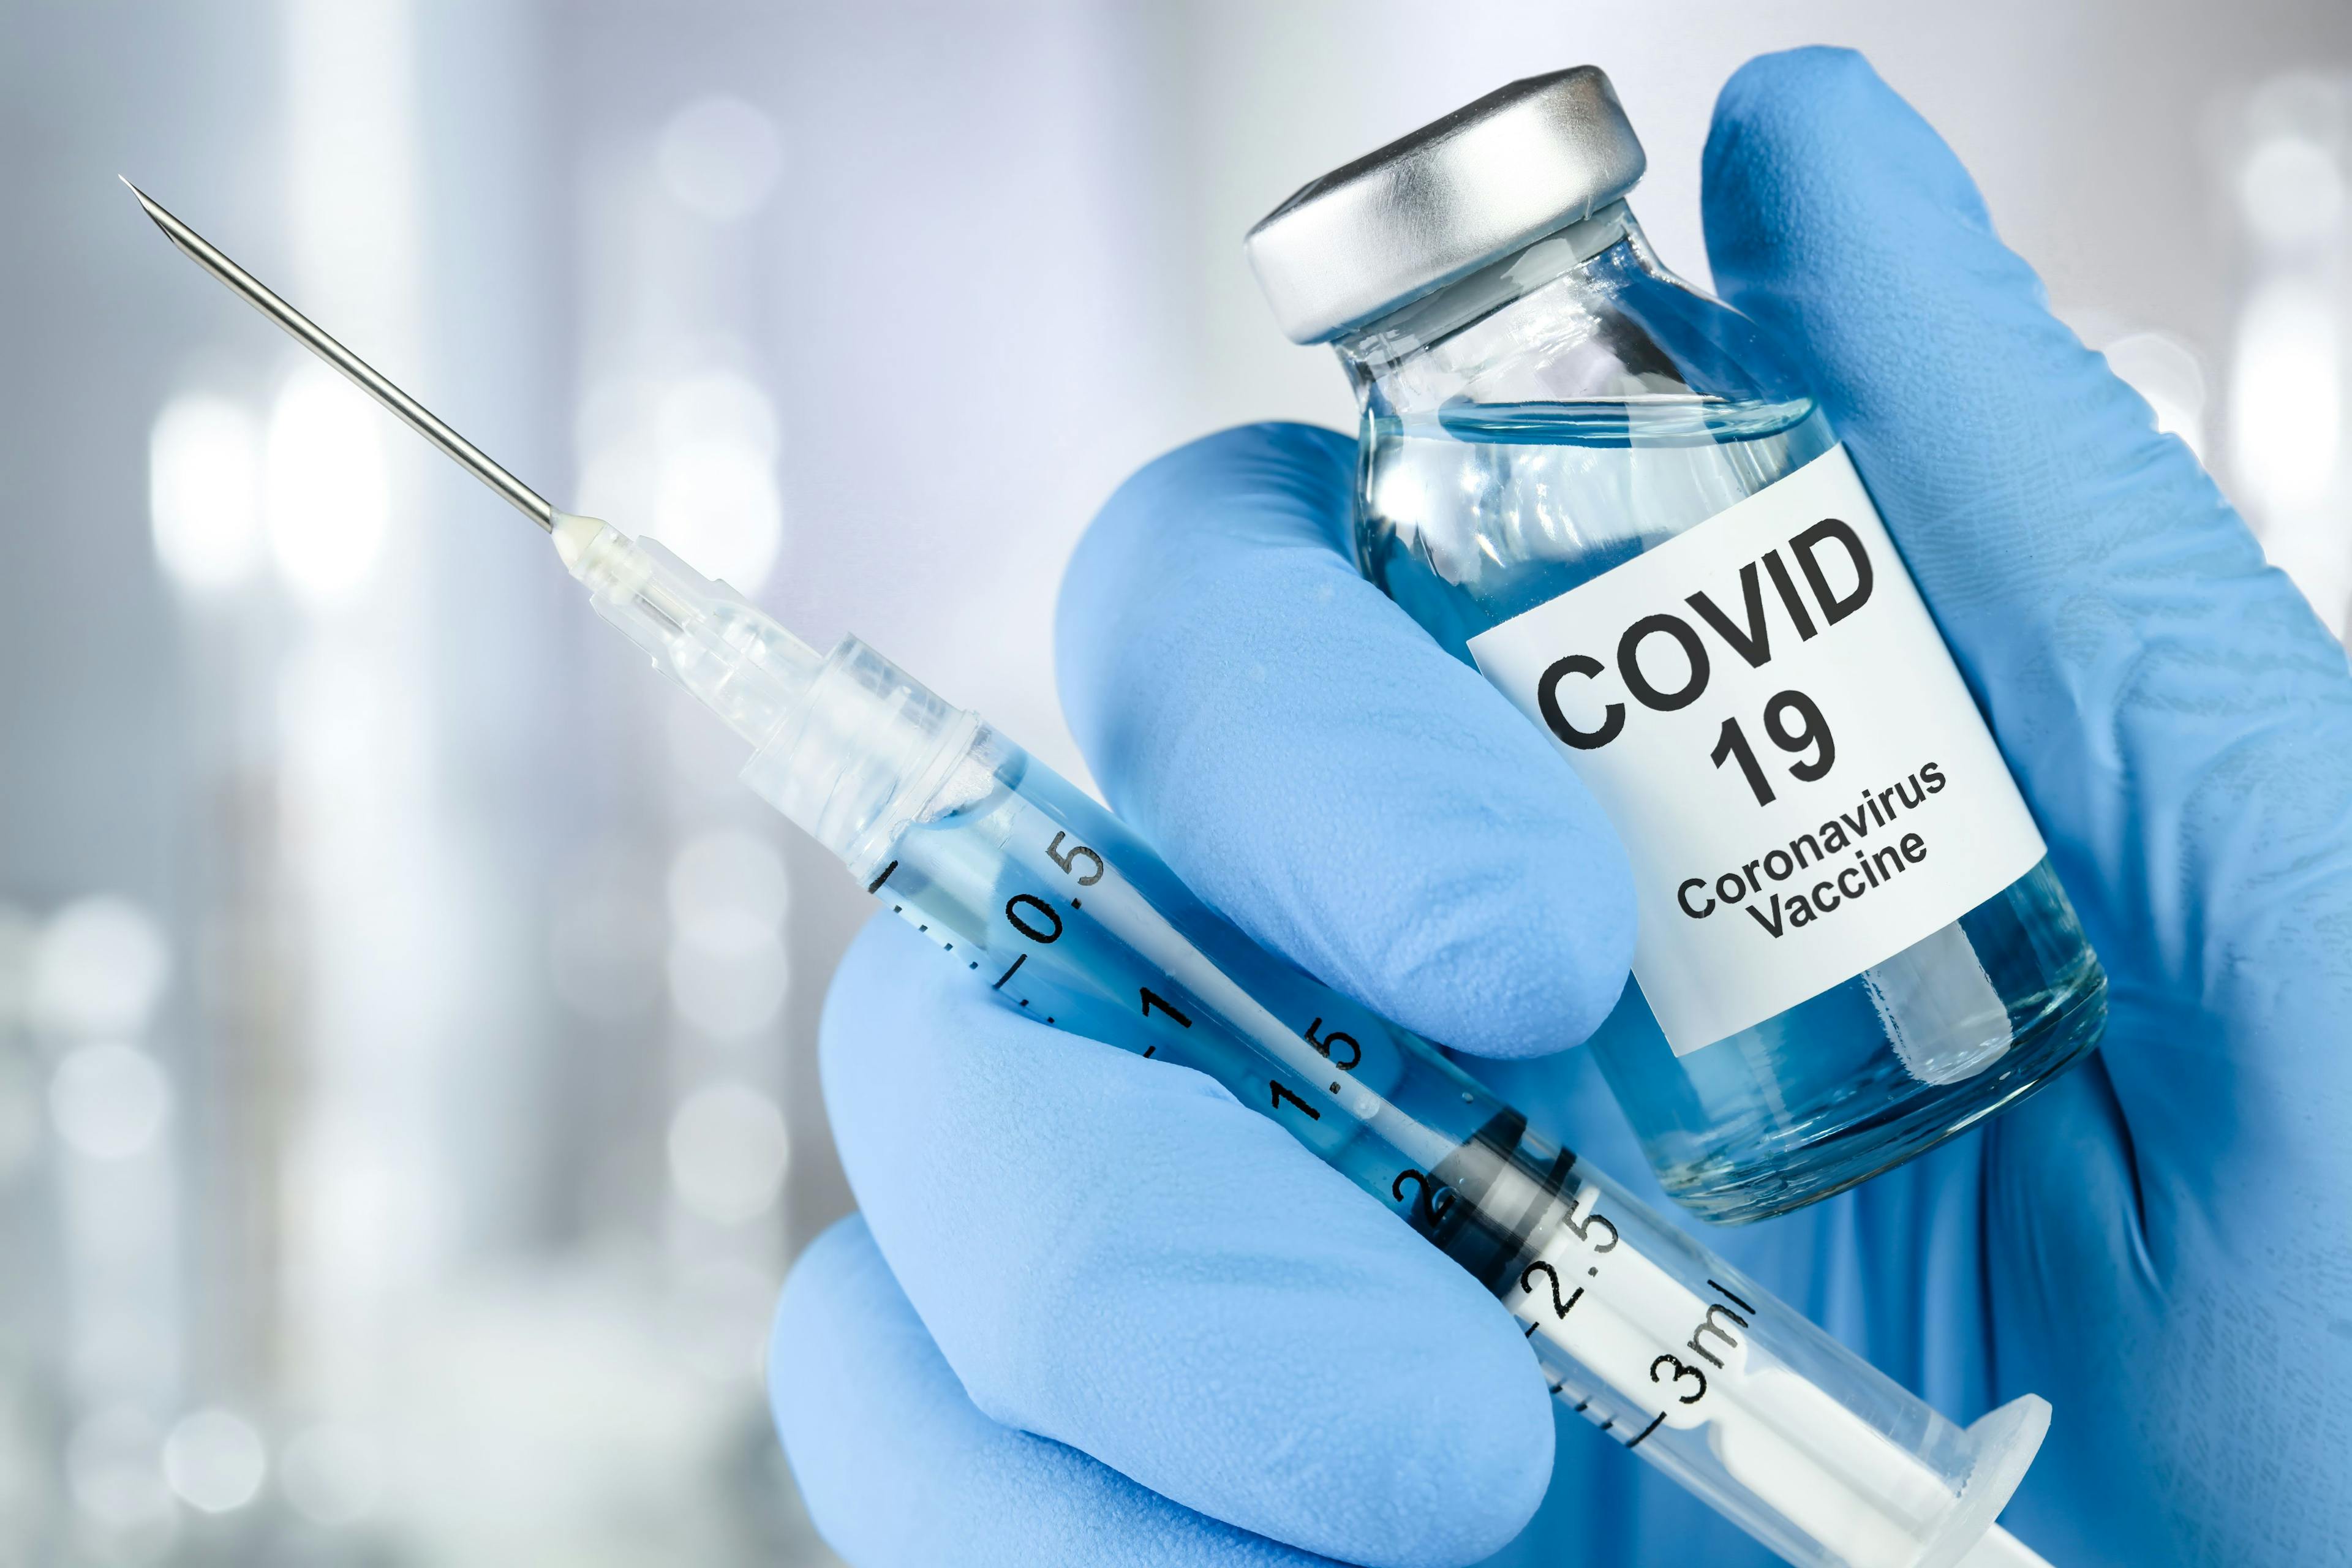 COVID-19 Vaccines and Innovative Oncology Services for Patients with Urothelial Carcinoma Have Expanded During the Pandemic